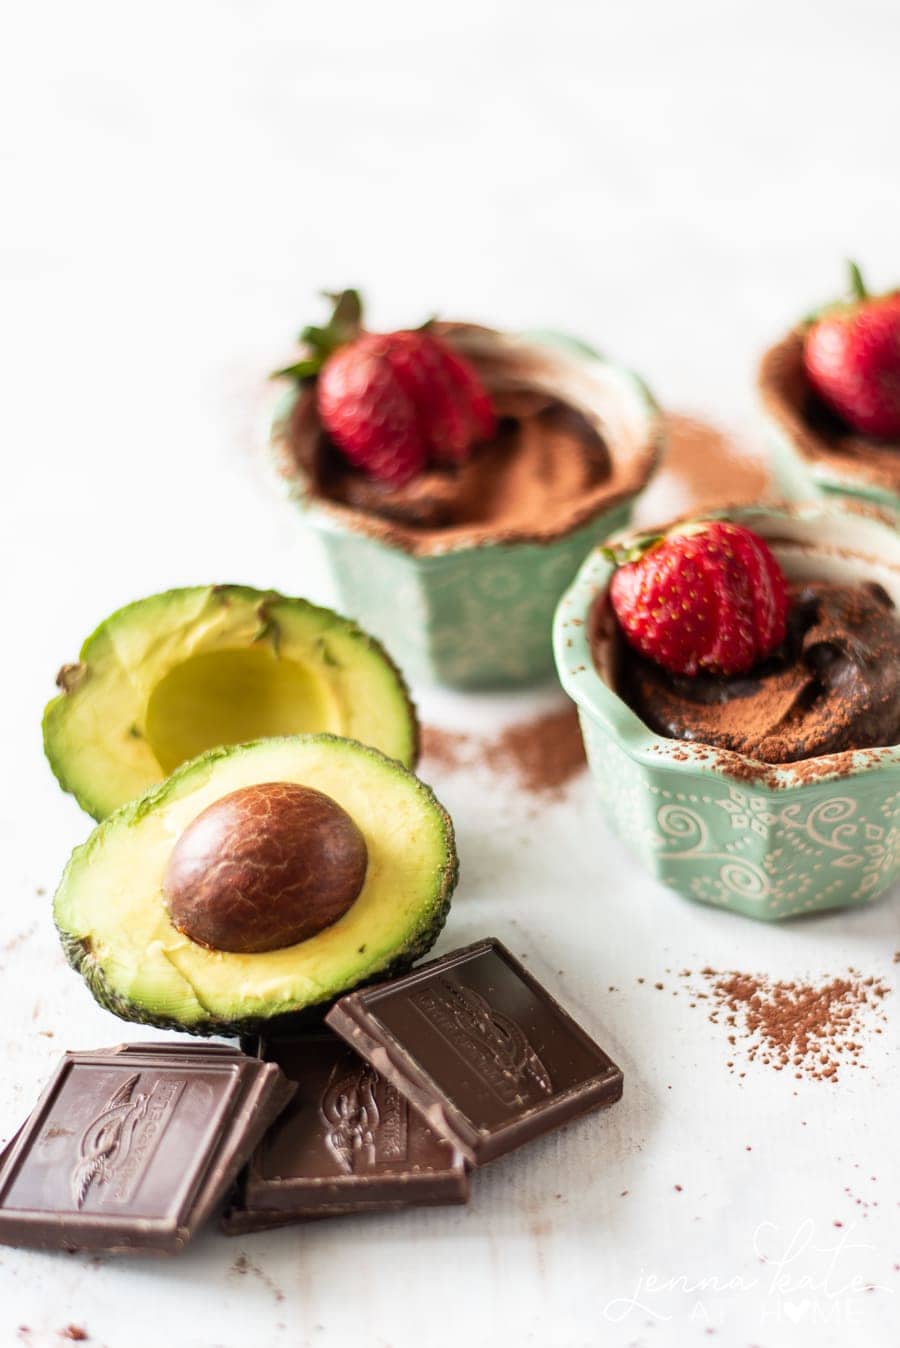 Healthy chocolate mousse made with avocados